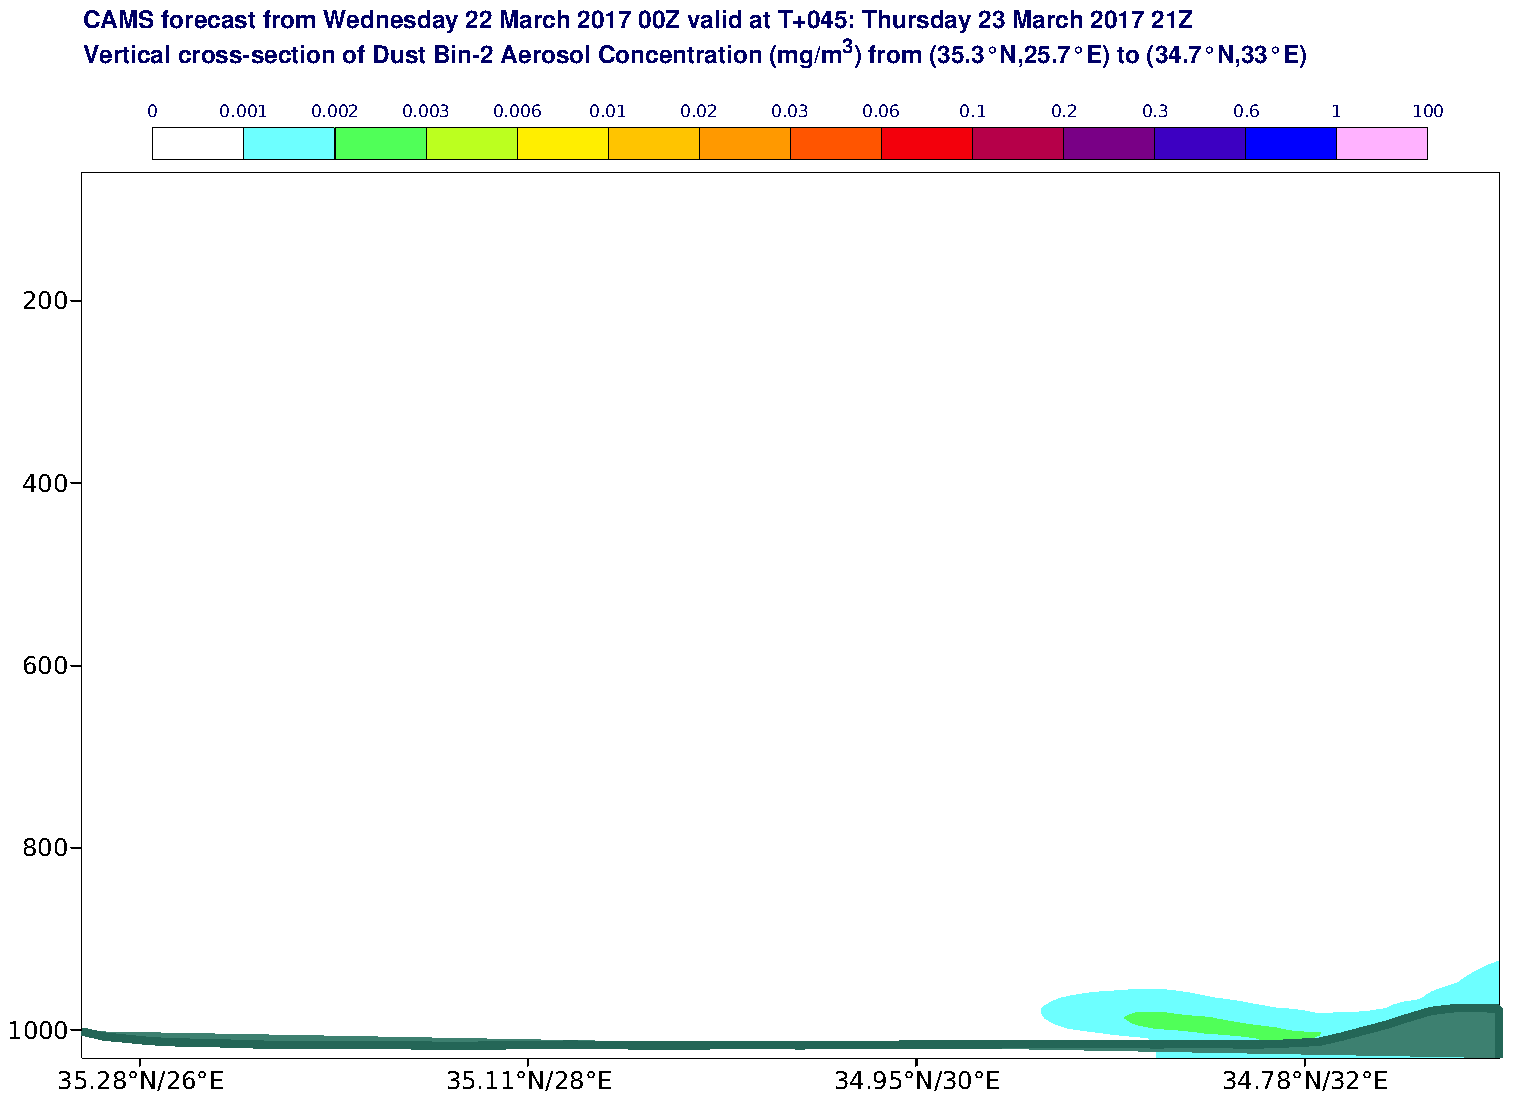 Vertical cross-section of Dust Bin-2 Aerosol Concentration (mg/m3) valid at T45 - 2017-03-23 21:00